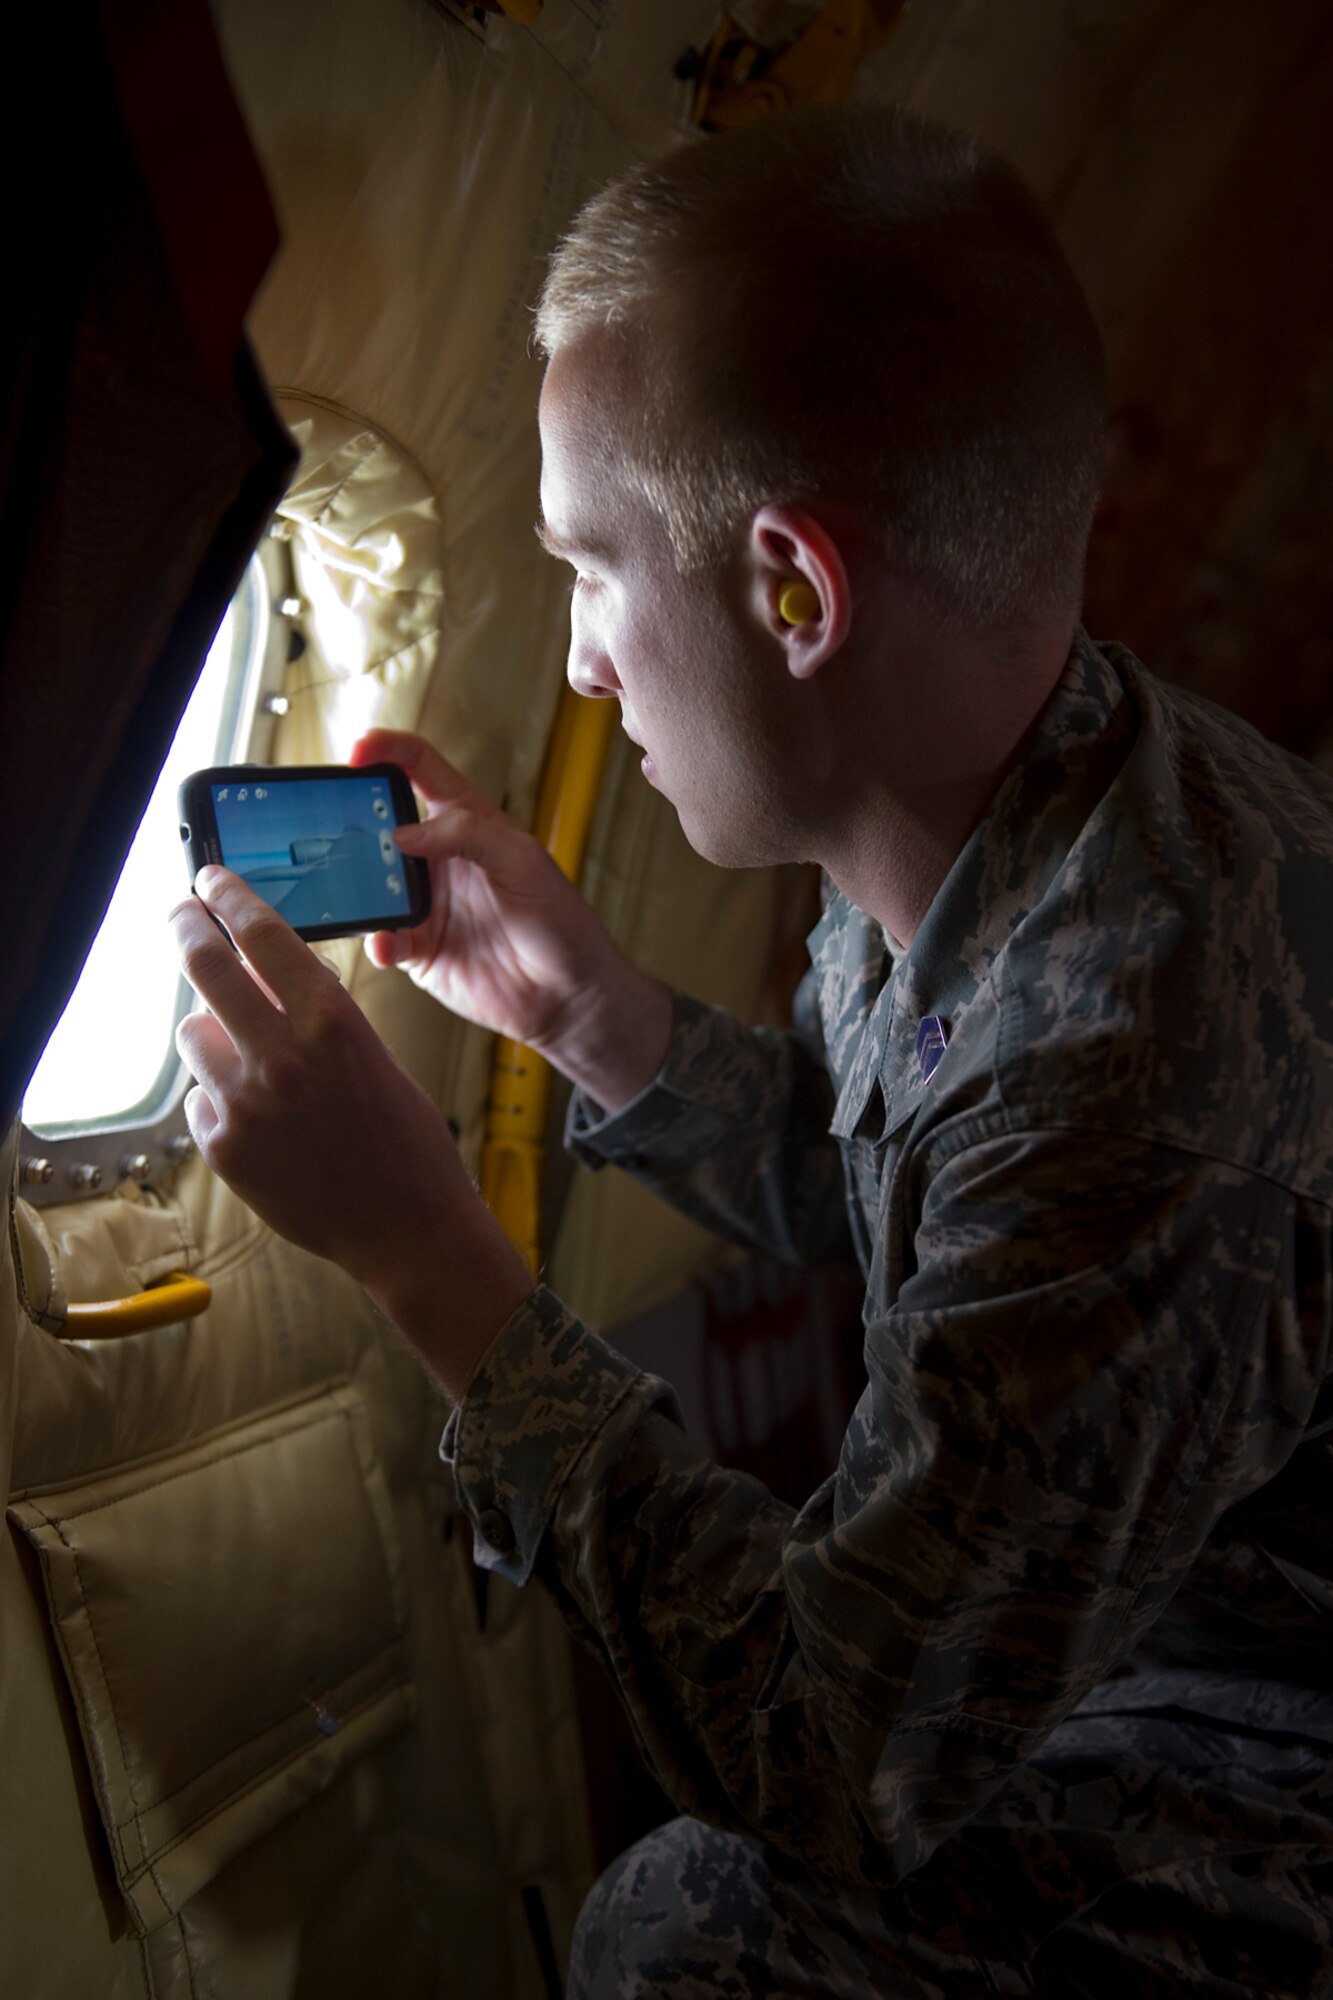 Walker Carlson, University of Notre Dame Air Force ROTC Detachment 225 cadet, uses his cell phone during an orientation flight on a 434th Air Refueling Wing KC-135 Stratotanker to take a photo of the aircrafts wing after departing Grissom Air Reserve Base, Ind., April 1, 2015.  During the flight 20 cadets and 6 midshipmen observed the refueling of a C-17 Globemaster III and an A-10 Thunderbolt II. (U.S. Air Force photo/Tech. Sgt. Benjamin Mota)